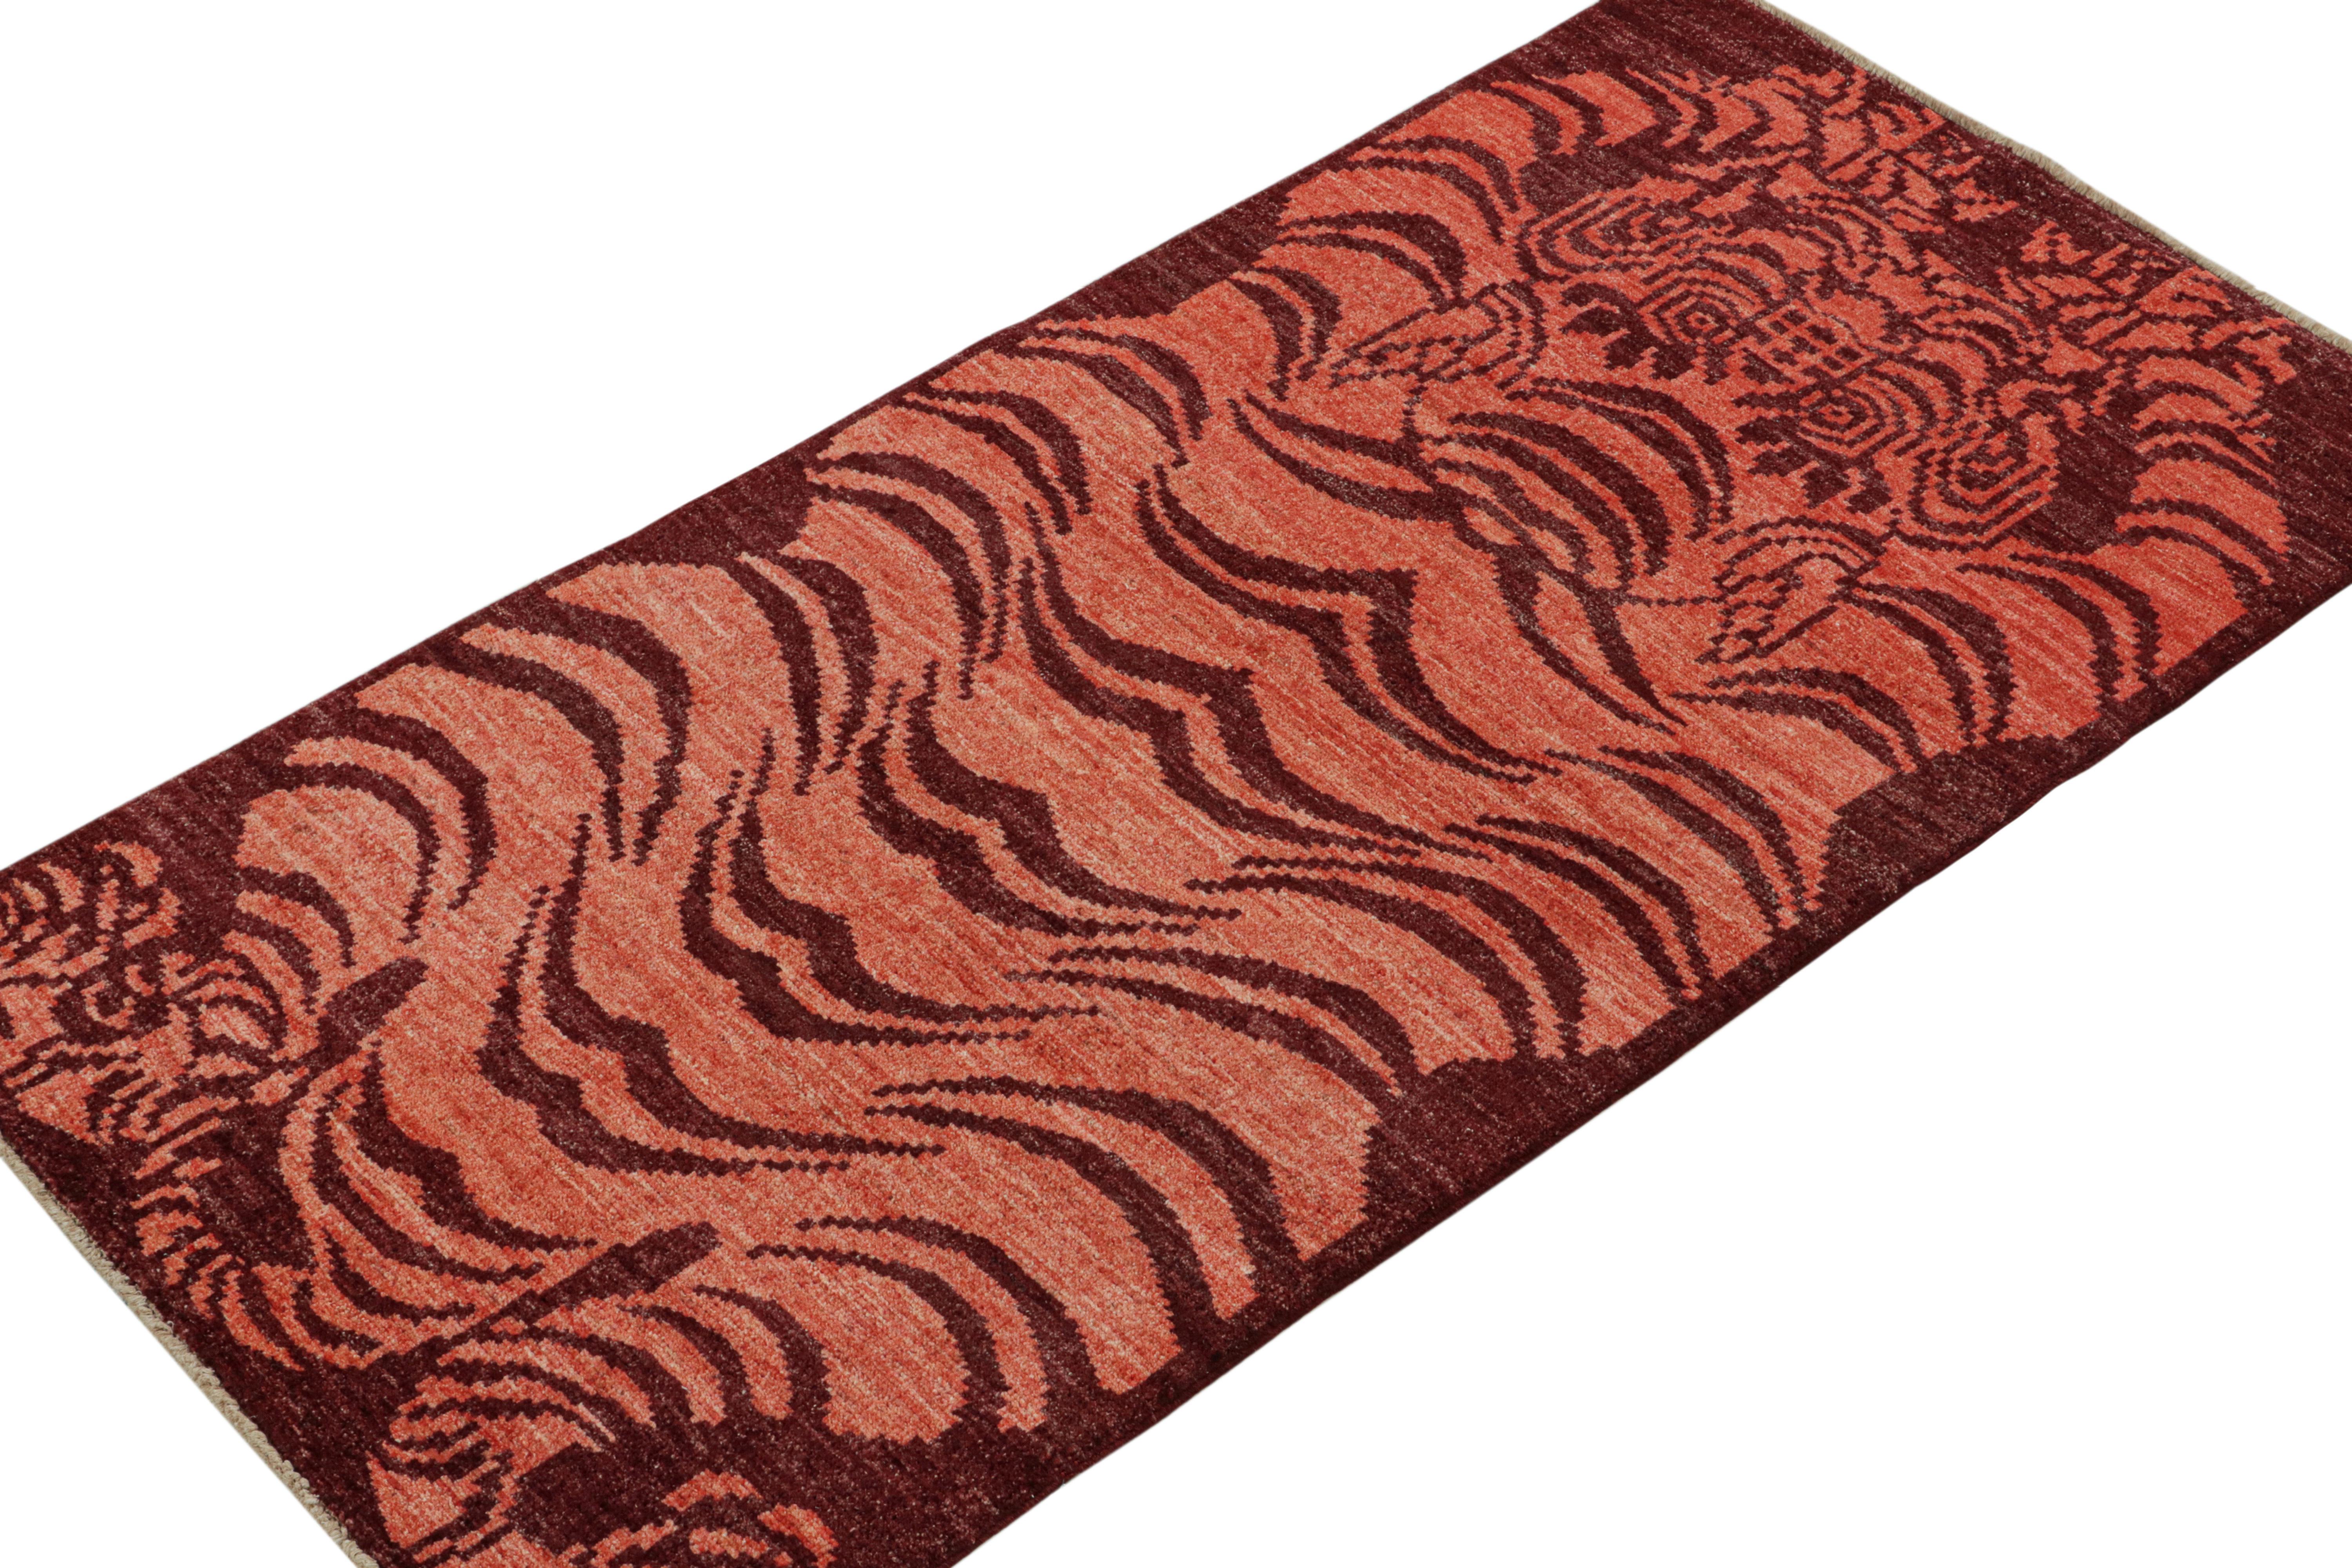 Pakistanais Tapis & Kilim's Classic Style Tiger Runner in Orange and Red Pictorial (en anglais) en vente